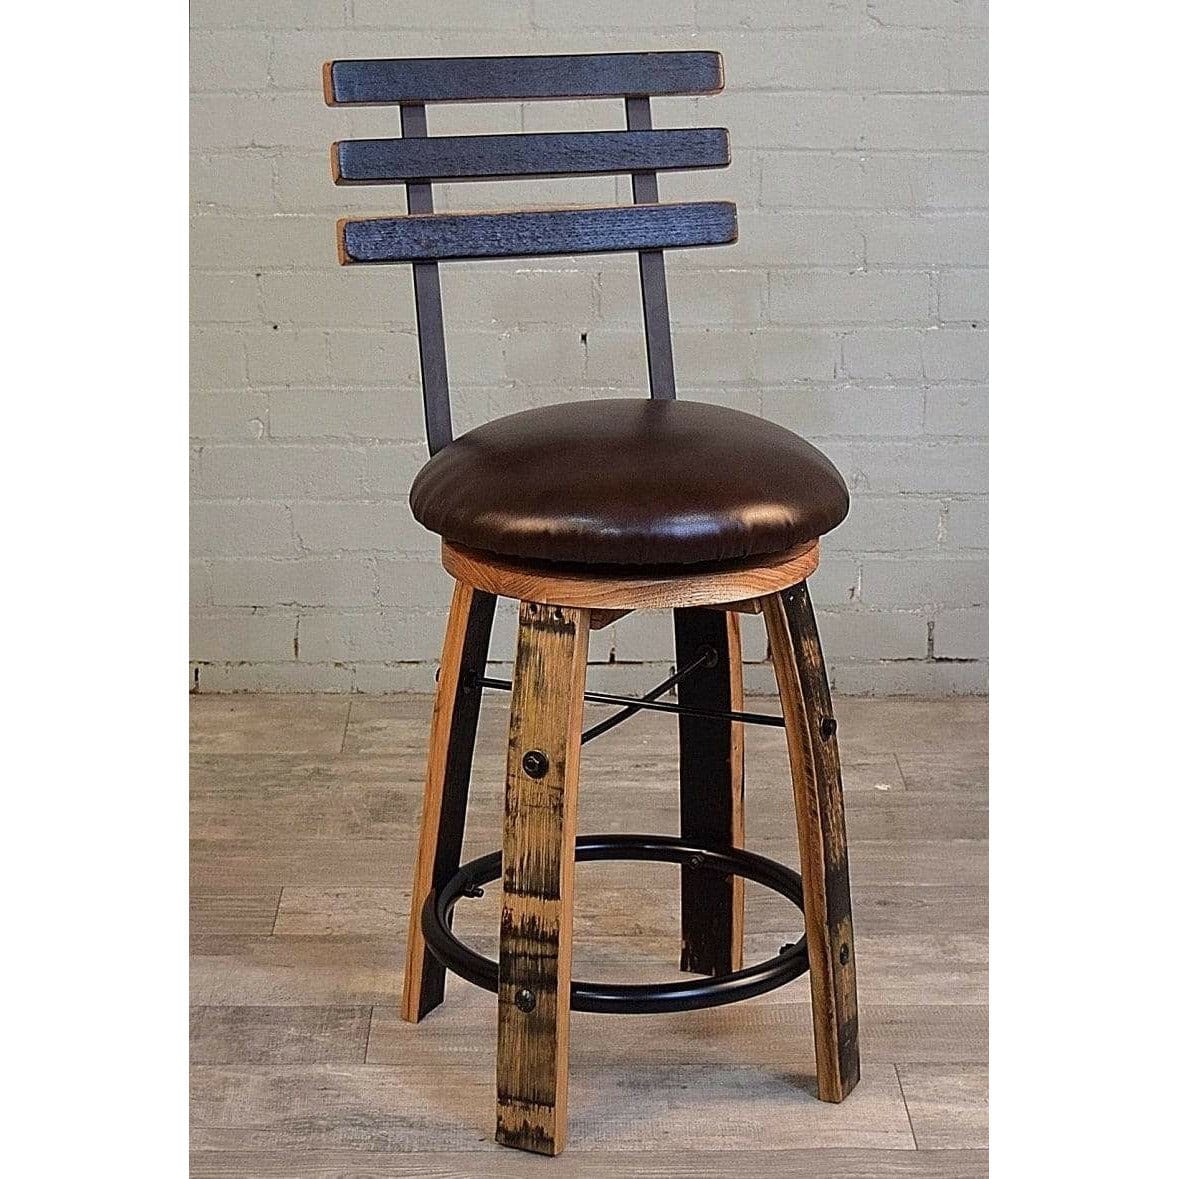 WILLIAM Sheppee USA Shooter's Bar Whiskey Barrel 36" Counter Height Comes With 5 Barstools, Black